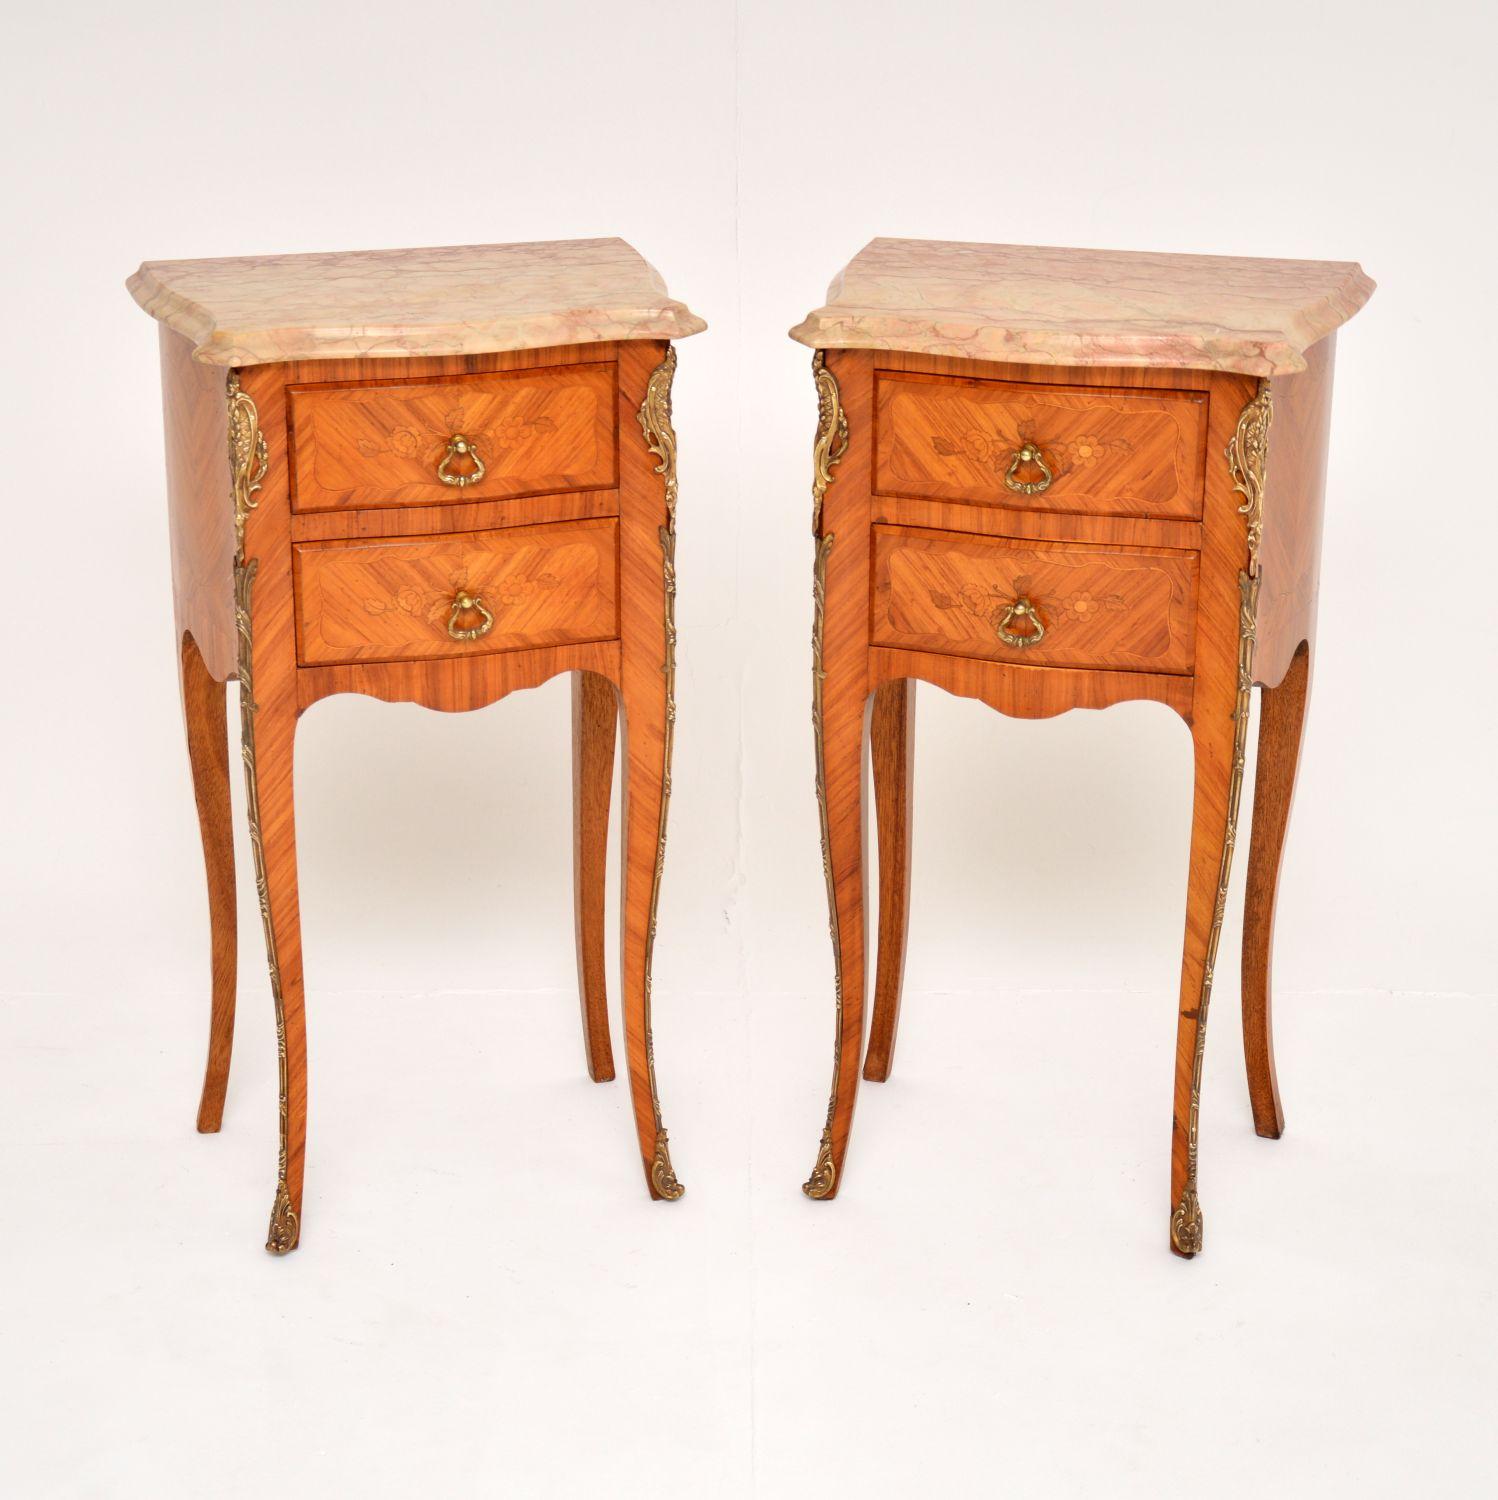 A beautiful pair of antique French bedside chests with marble tops, dating from around the 1920-30’s period.

They are of excellent quality & they have stunning inlaid marquetry of various woods. The marble tops have absolutely gorgeous colours